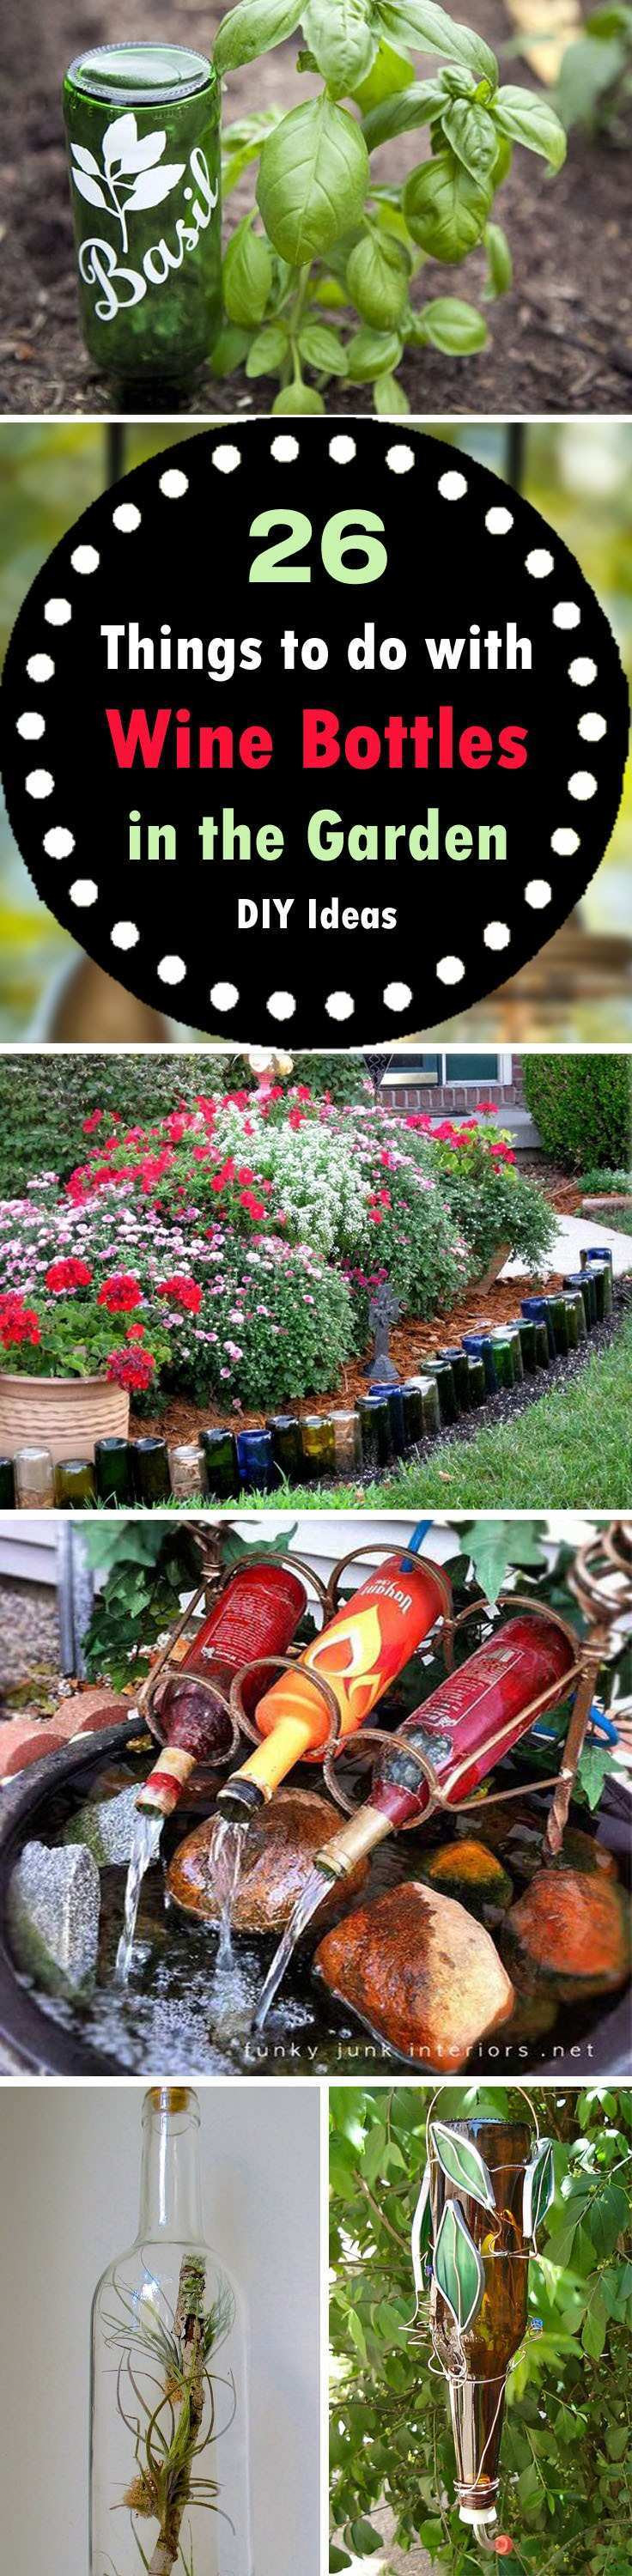 23 Lovely Vw Bug Flower Vase 2024 free download vw bug flower vase of build a planter box for vegetables luxury wooden wedding flowers h throughout build a planter box for vegetables new diy wine bottle ideas for the garden 26 wine